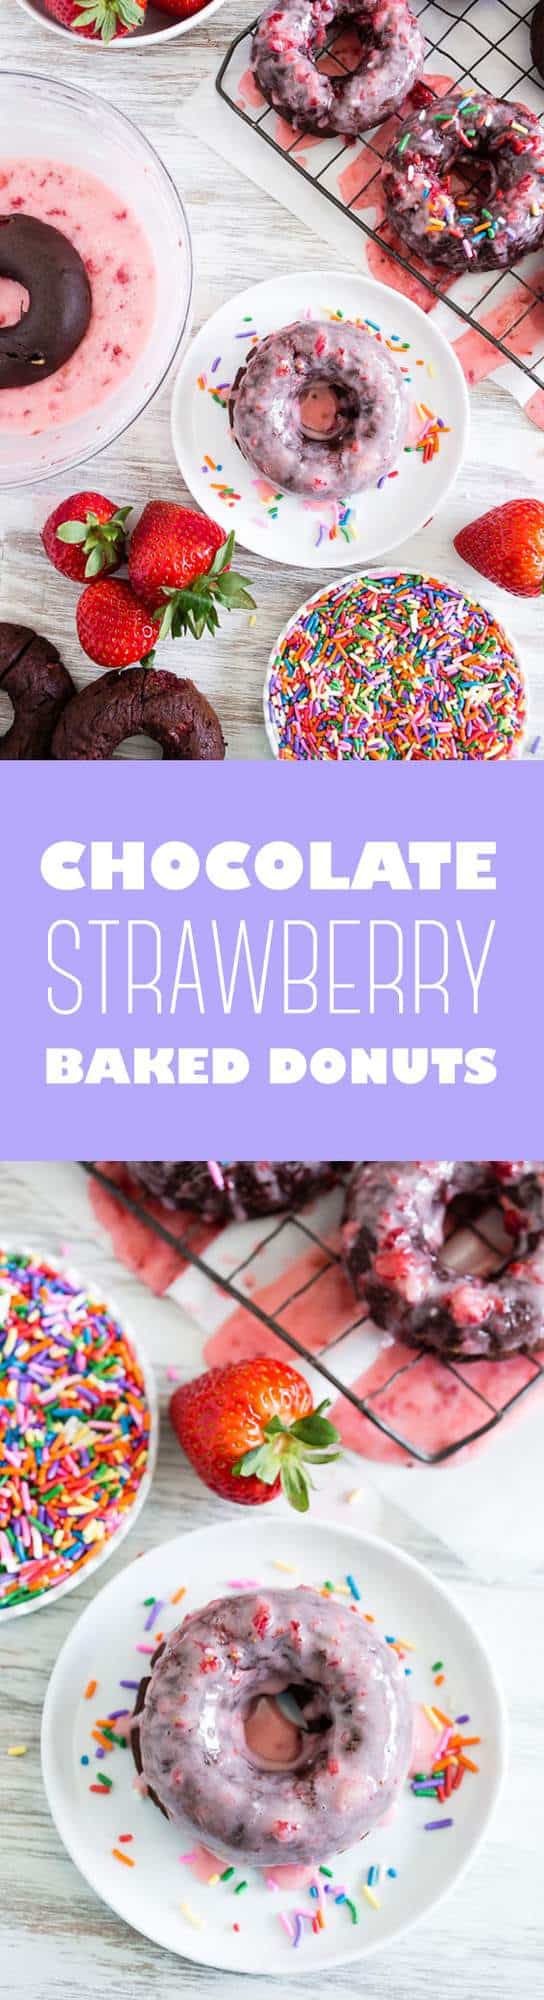 Baked Chocolate Donuts are drenched in strawberry icing and will please everyone in your house. Watch them disappear!